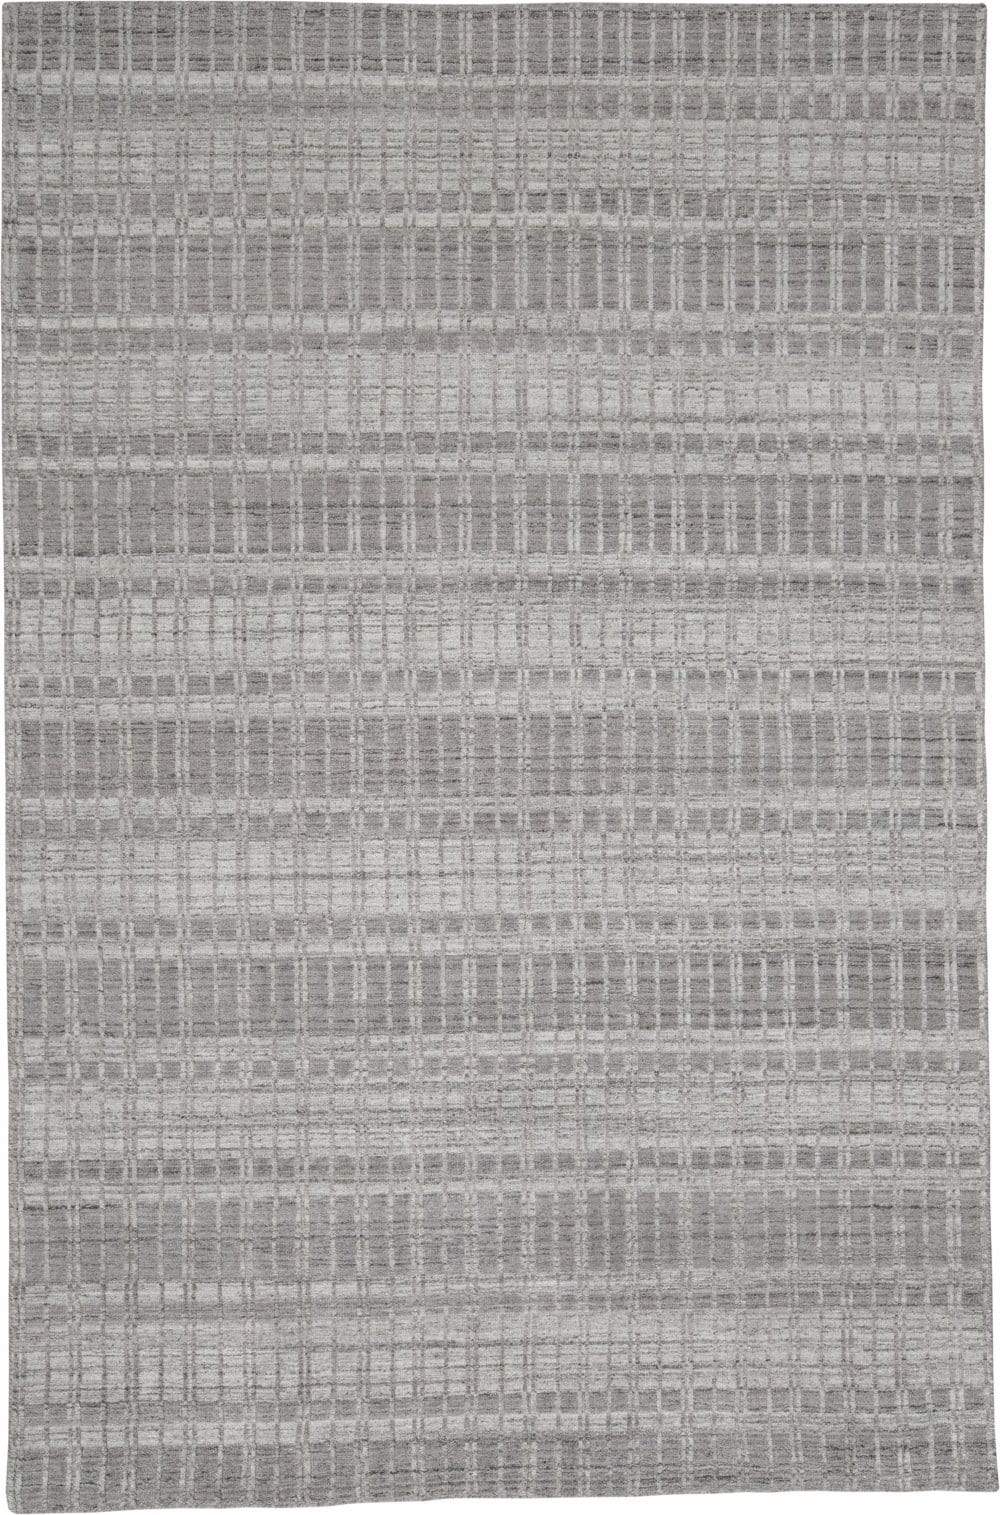 Feizy Feizy Odell Classic Handmade Rug - Available in 5 Sizes - Light Gray & Warm Gray 3'-6" x 5'-6" 6866385FGRYSLVC50